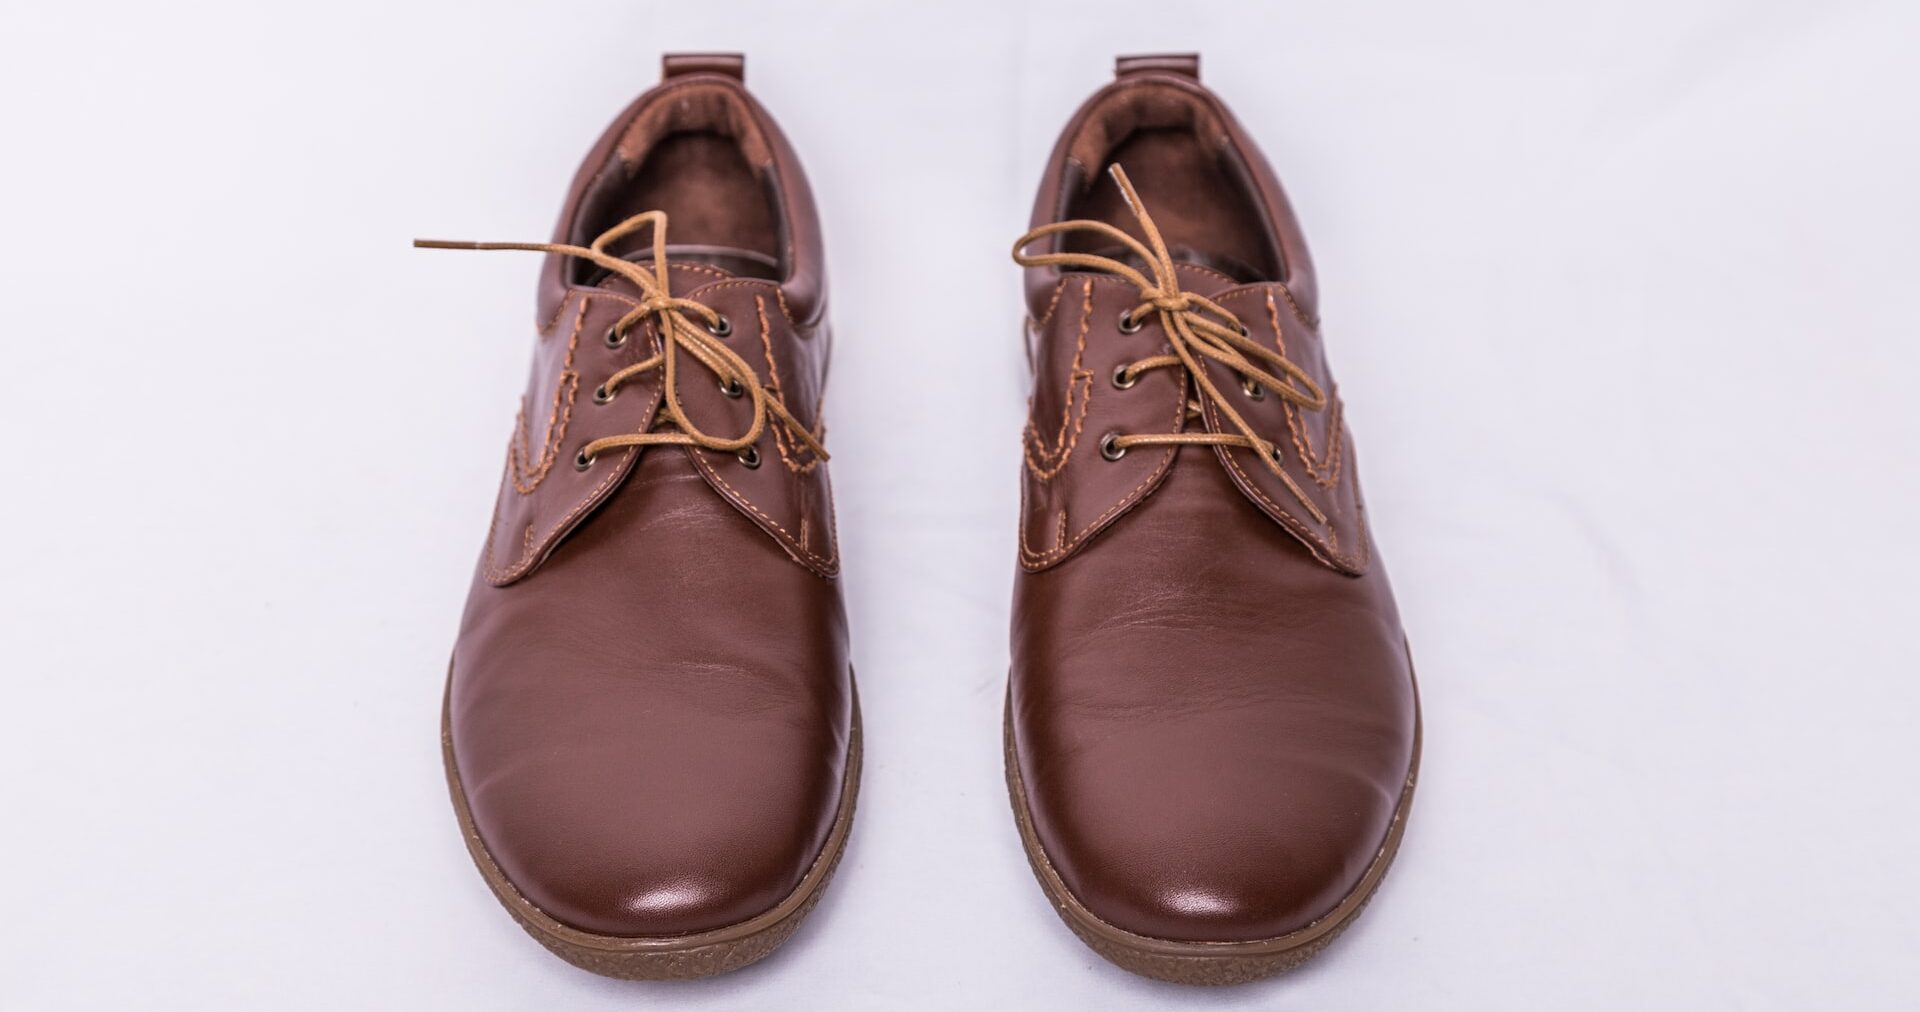 Can You Wear Brown Shoes With Black Pants? | The Adult Man